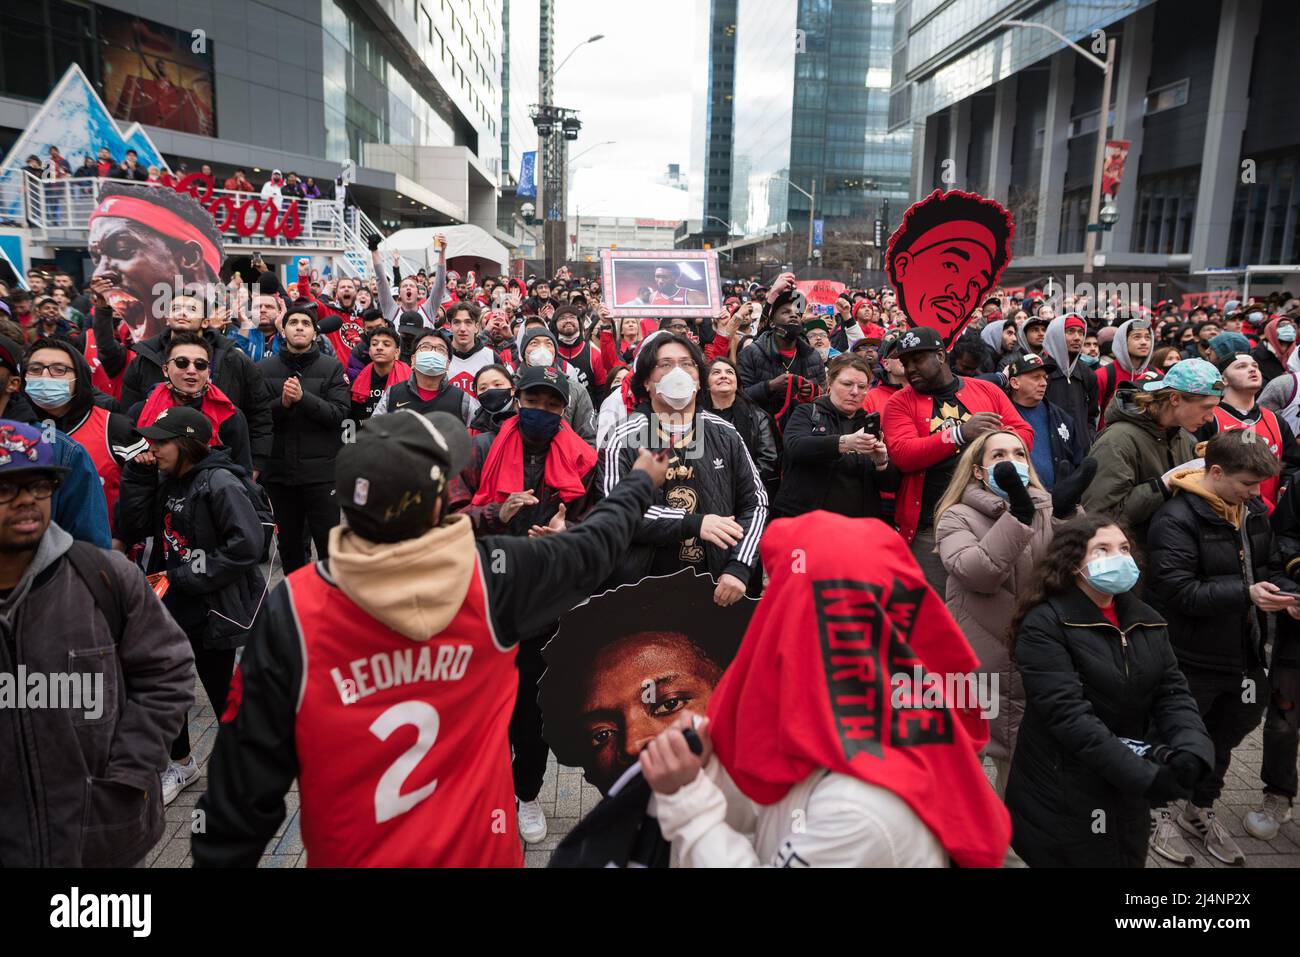 Fans watch and react as they watch 2022 NBA playoff game action between the Raptors and Philadelphia 76ers at a closed-off tailgate area outside the Scotiabank Arena known as Jurassic Park in